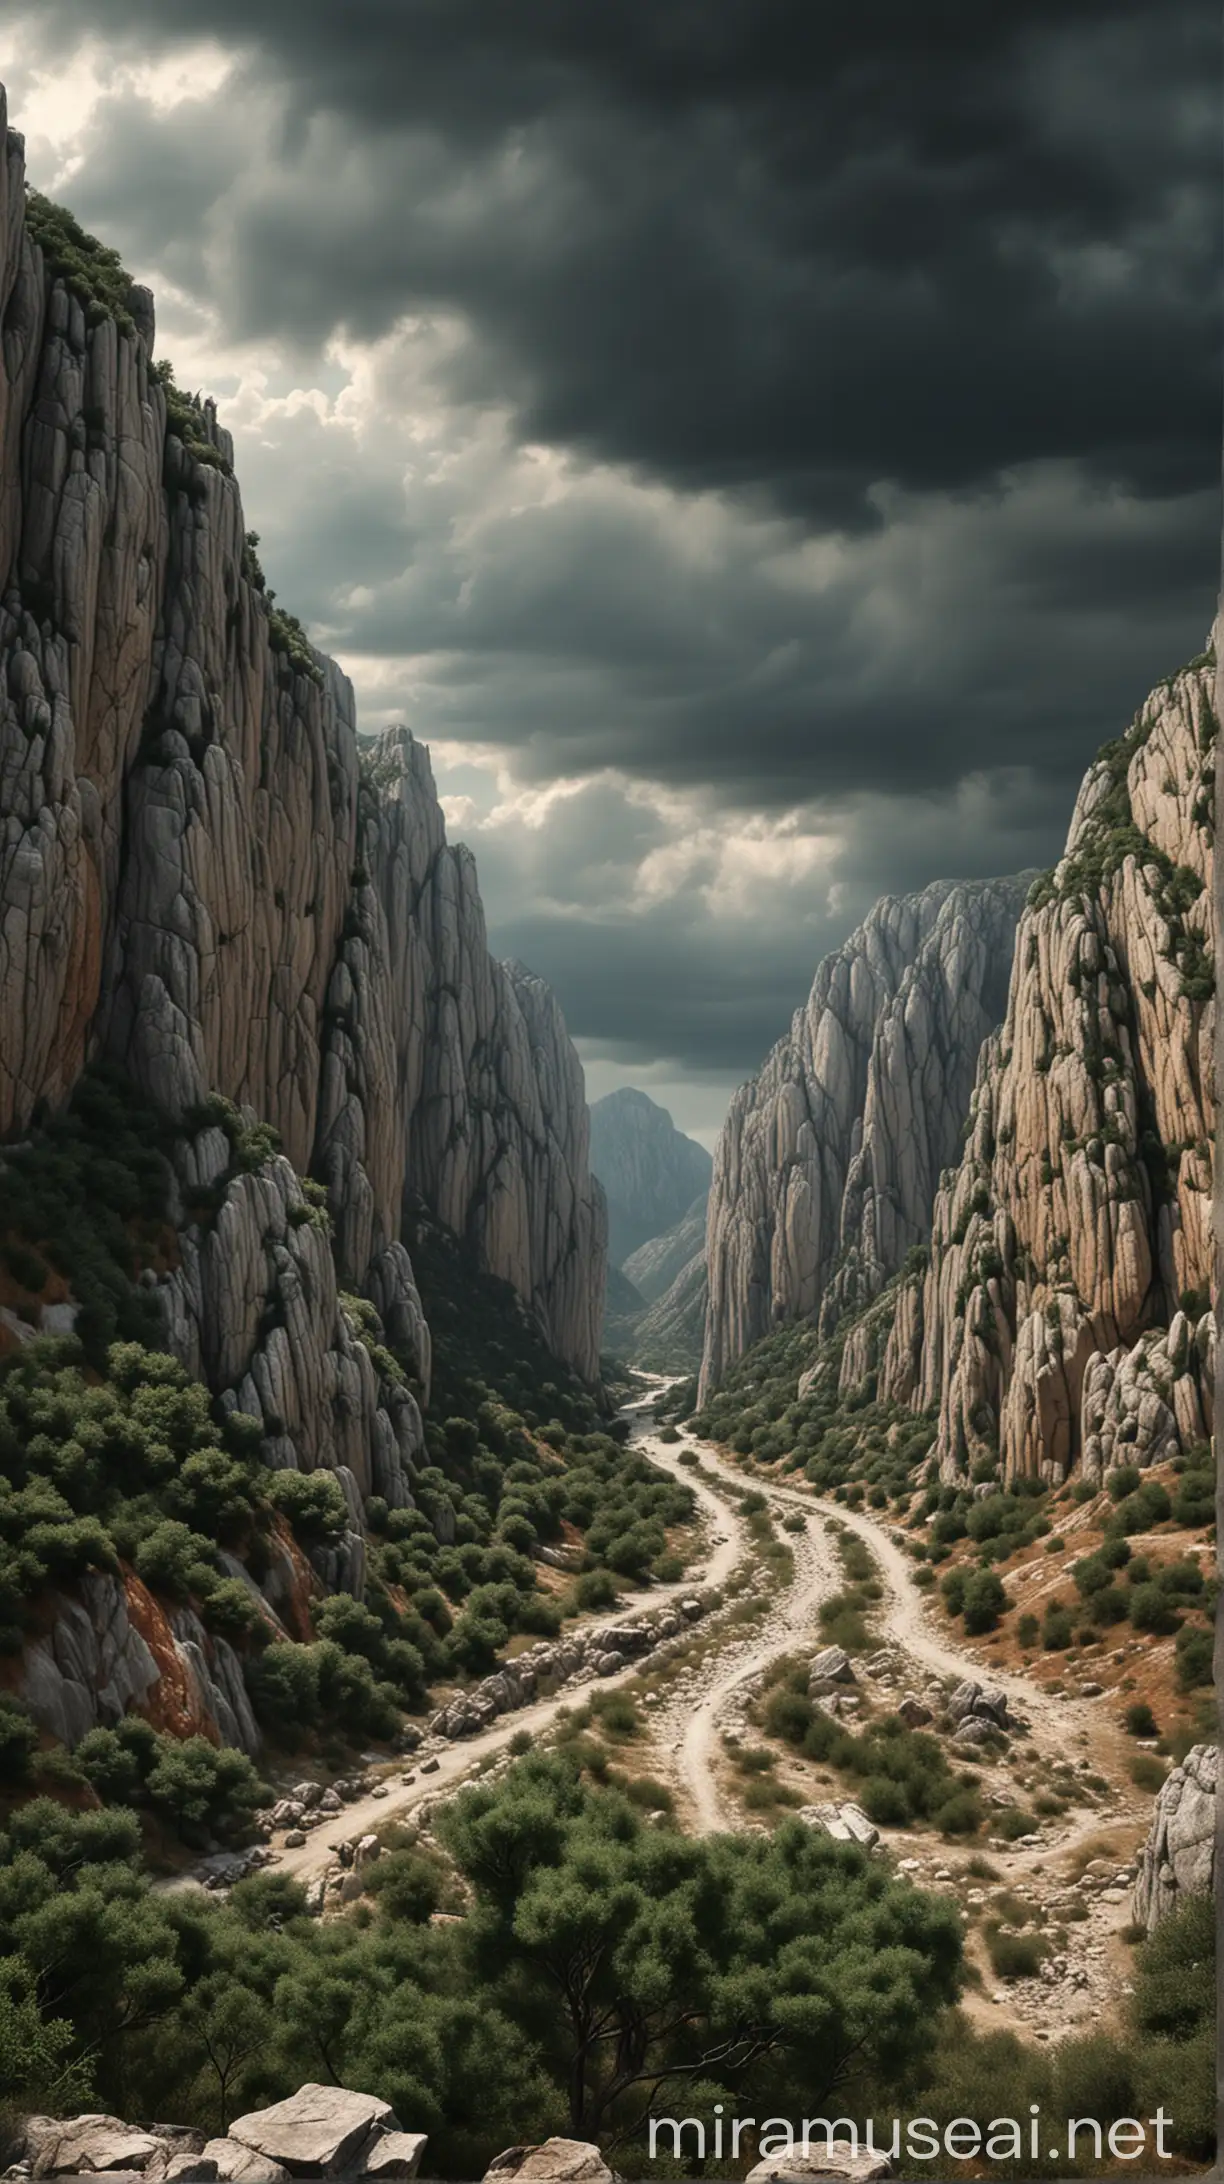 Thermopylae Rugged Landscape Panorama with Cliffs and Ominous Clouds